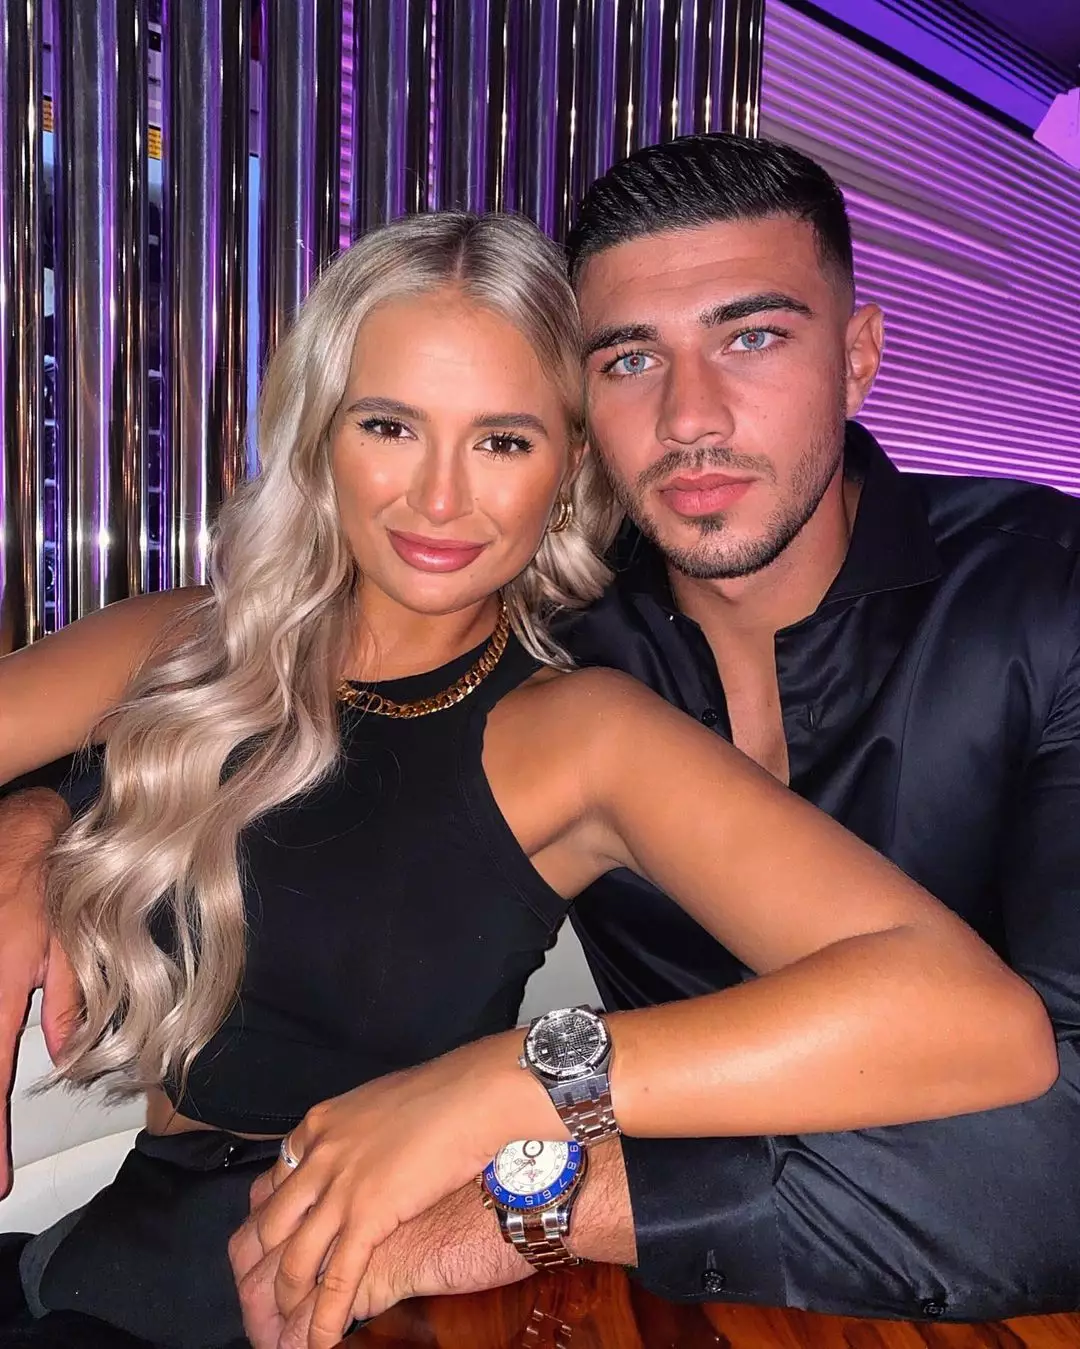 Molly-Mae has found fame with partner Tommy Fury since Love Island (